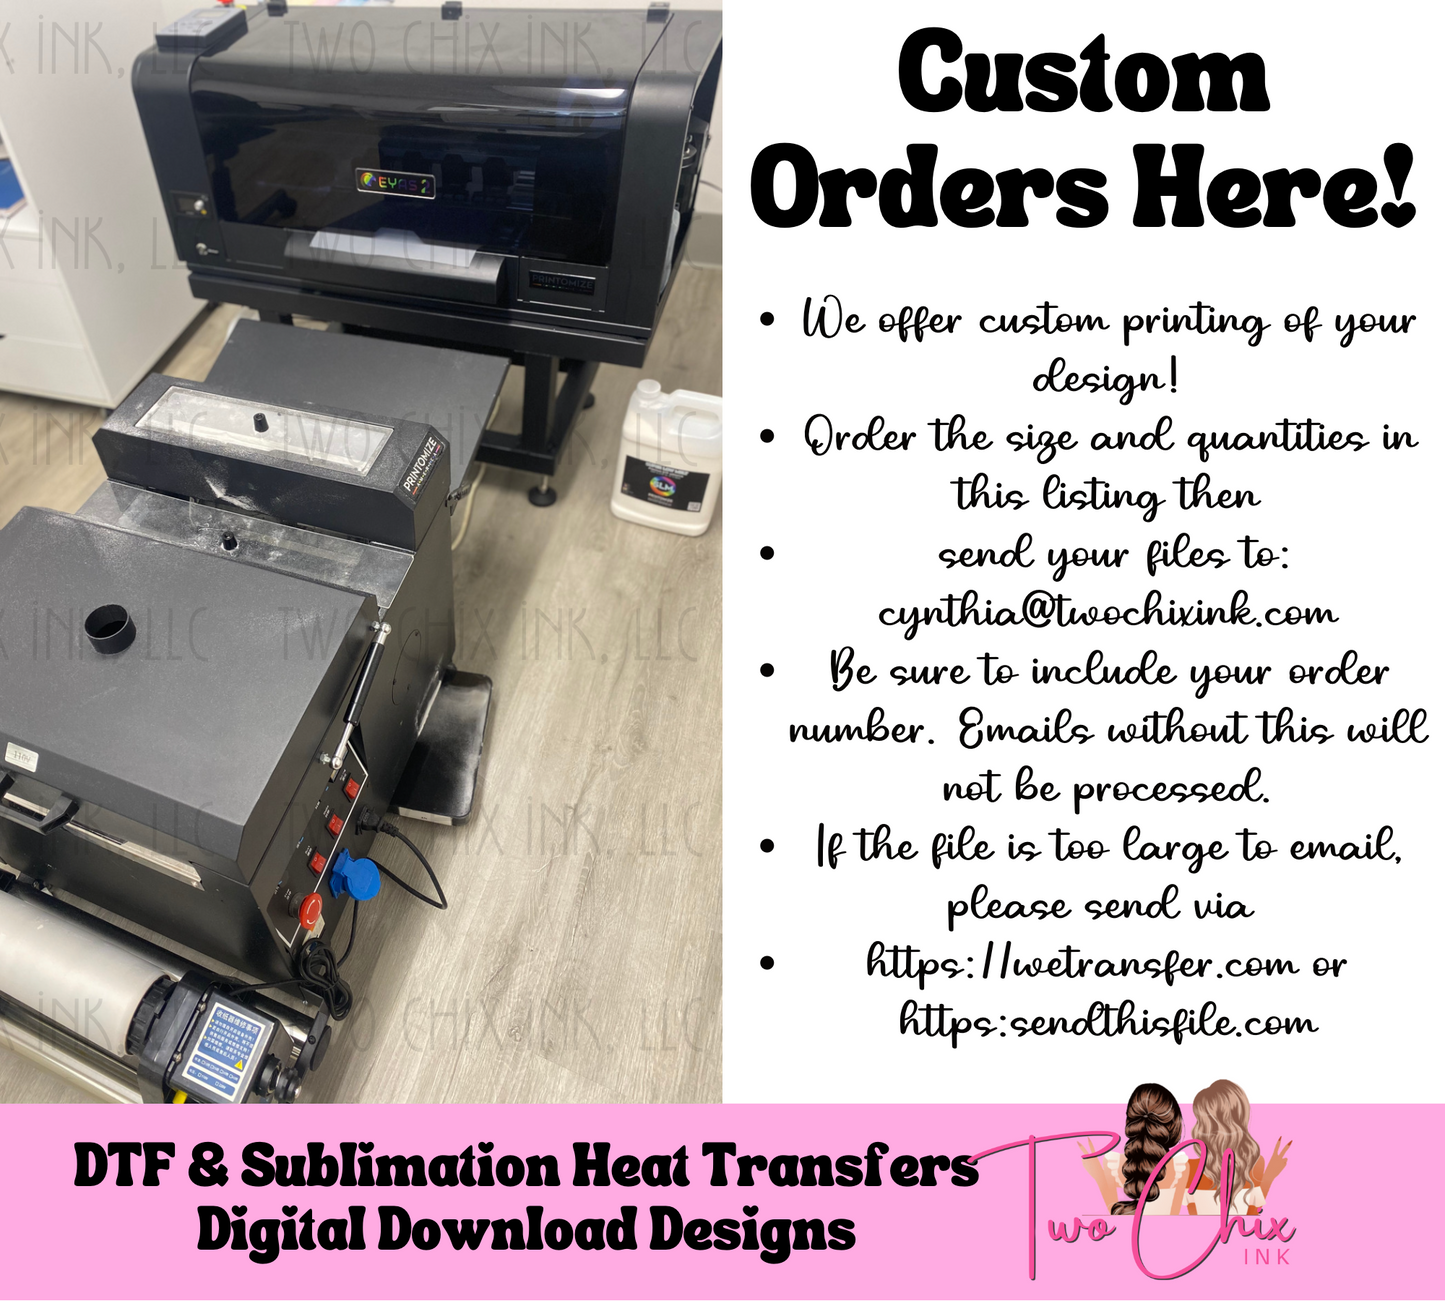 Custom DTF Transfers for Personalized Tees from Infant to Adult Sizes with Pocket and Sleeve Options